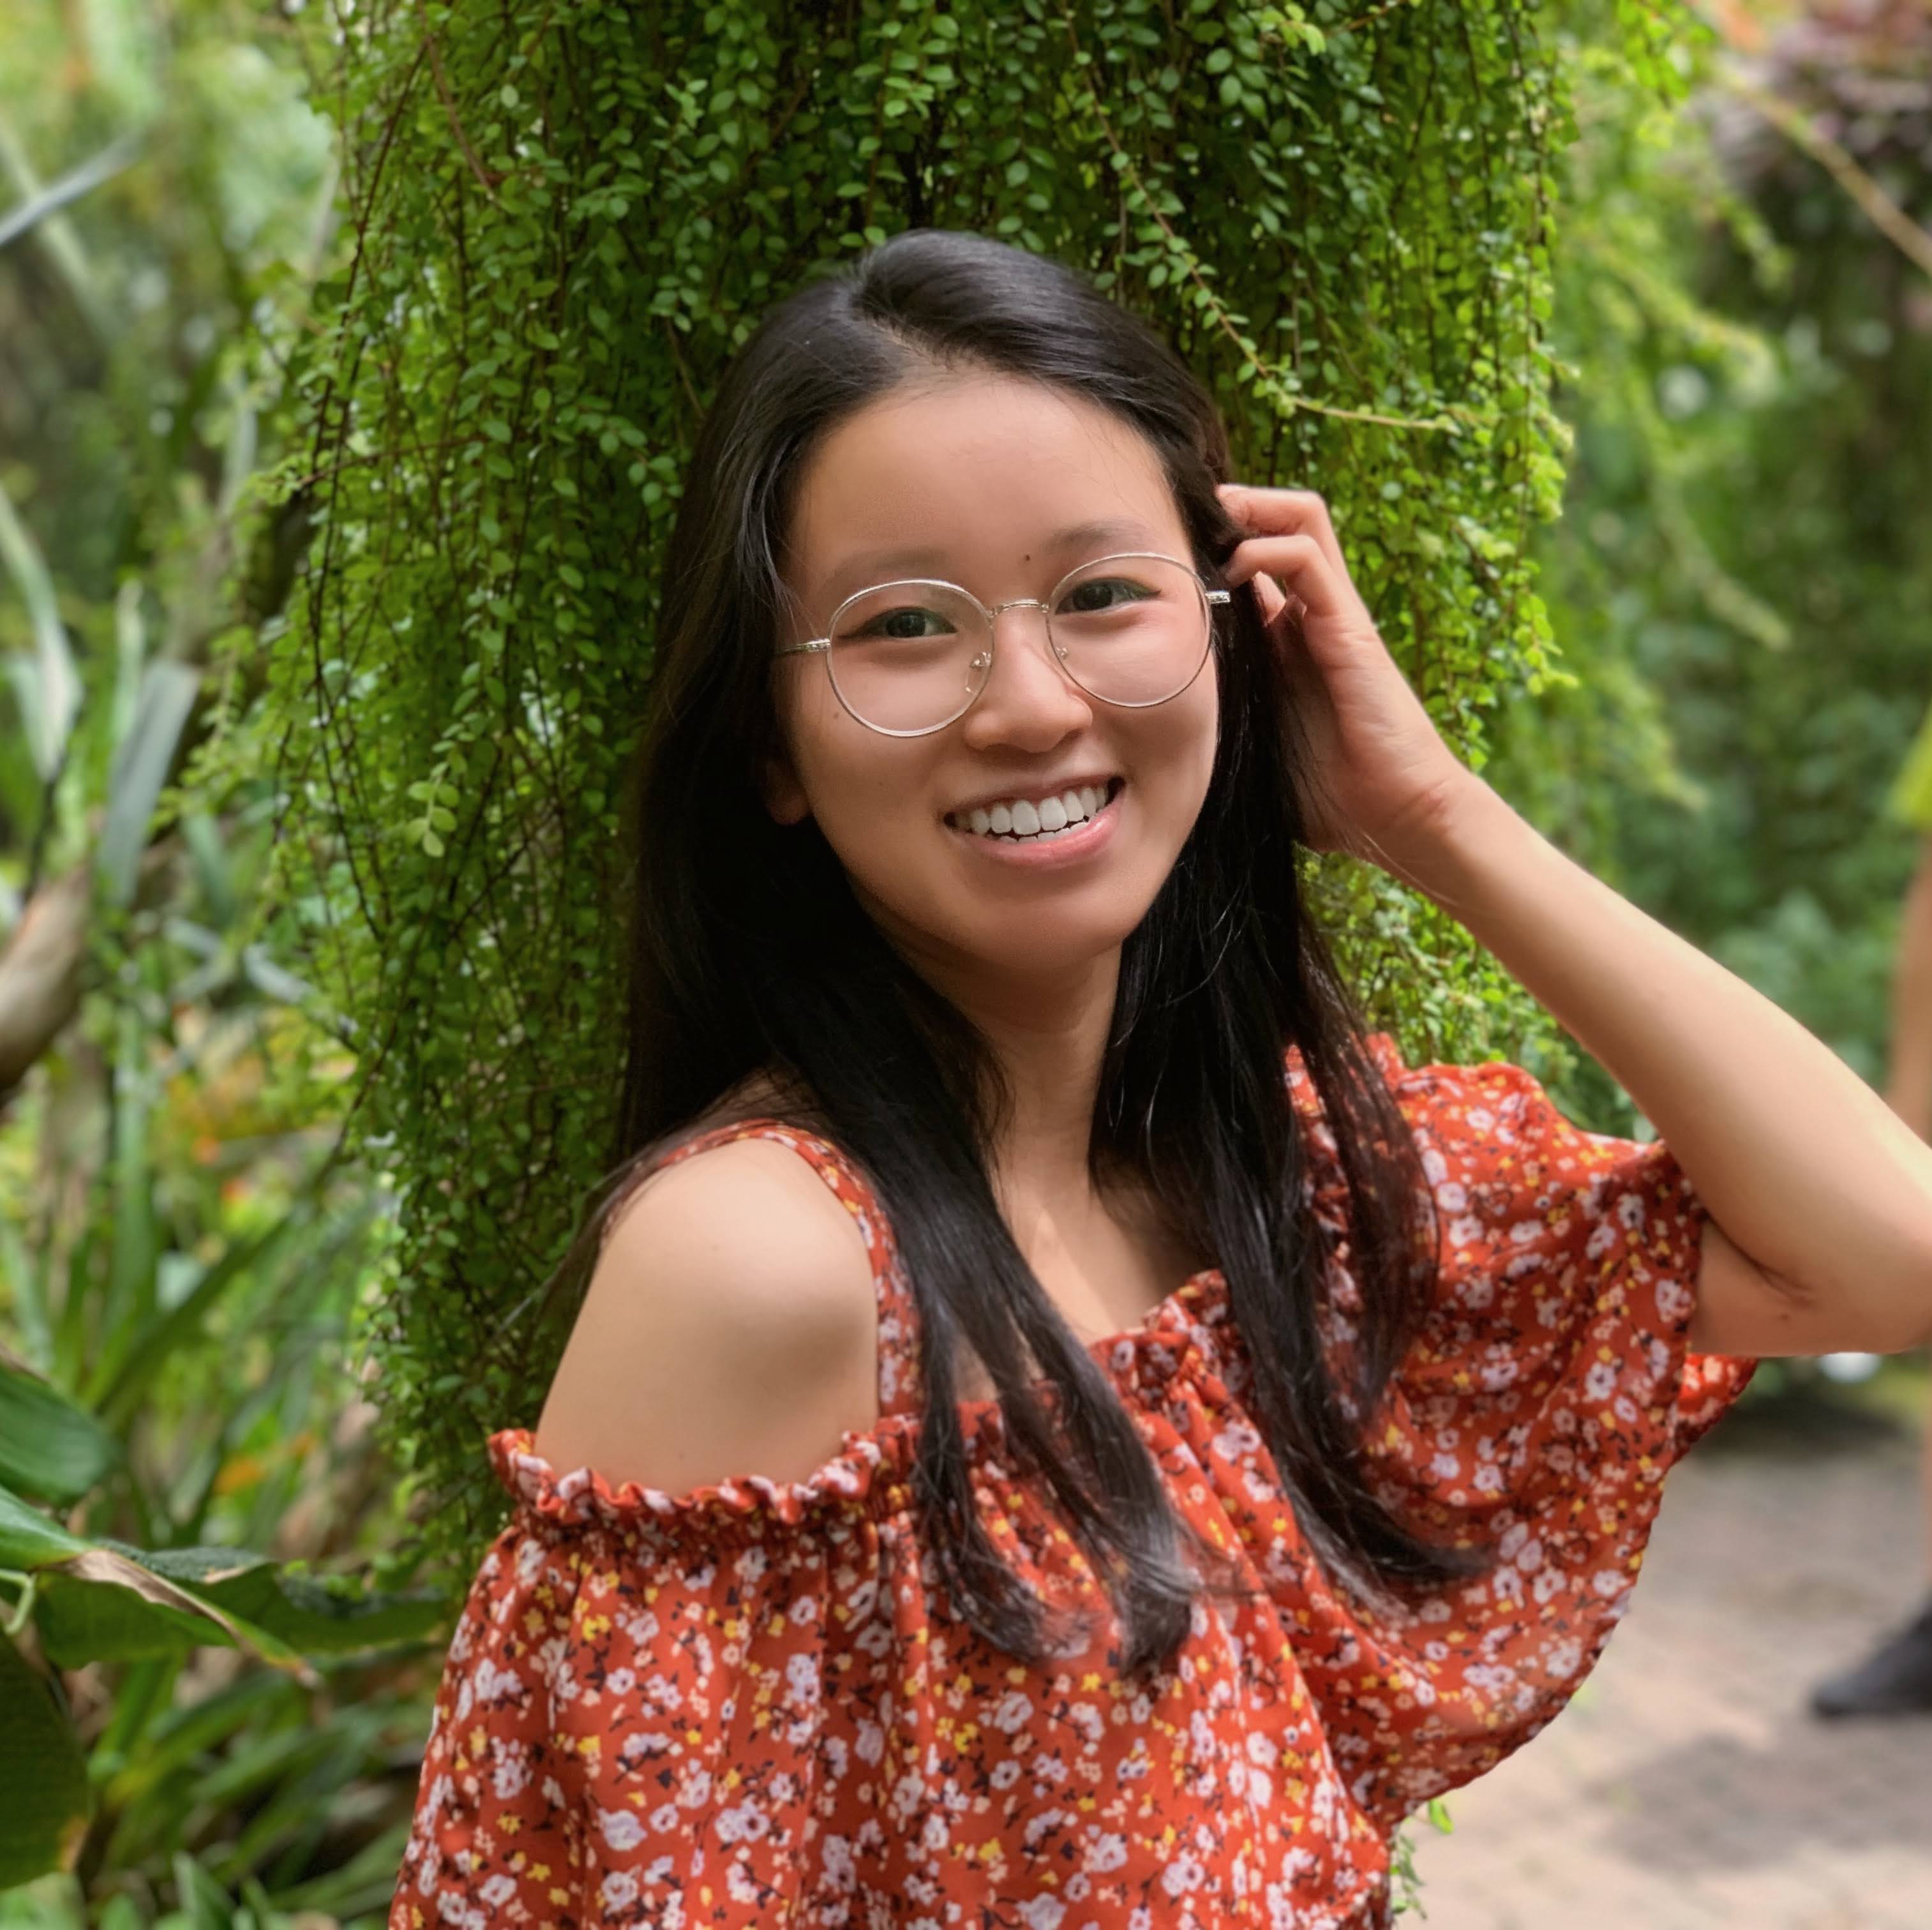 Mary Tuyetnhi Tran in an orange patterned shirt turns to face the camera, with their hand tucking hair behind their ear. They are in front of lush green foliage. 